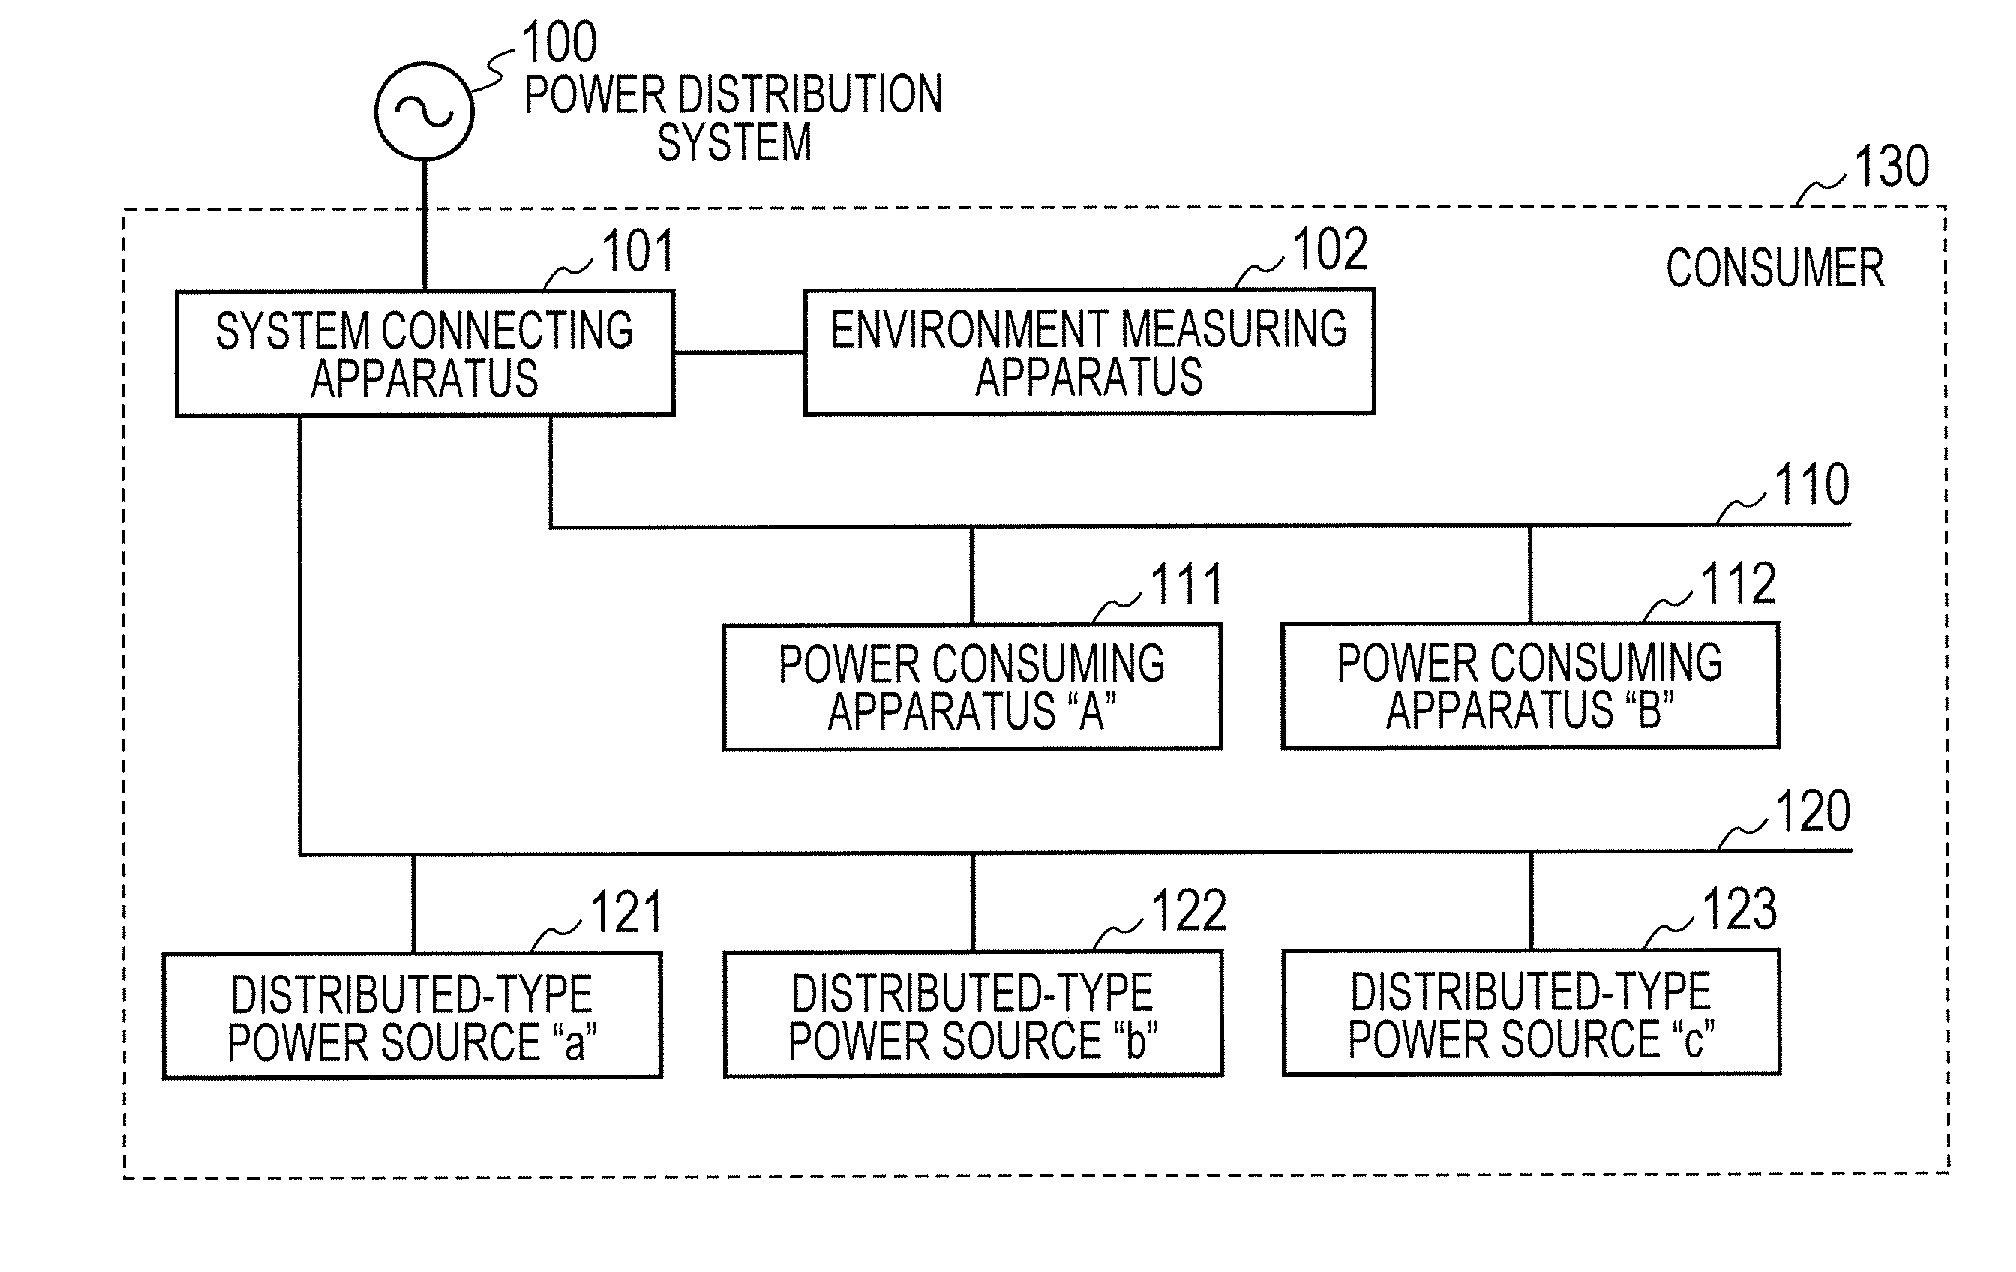 Power distribution system connecting apparatus